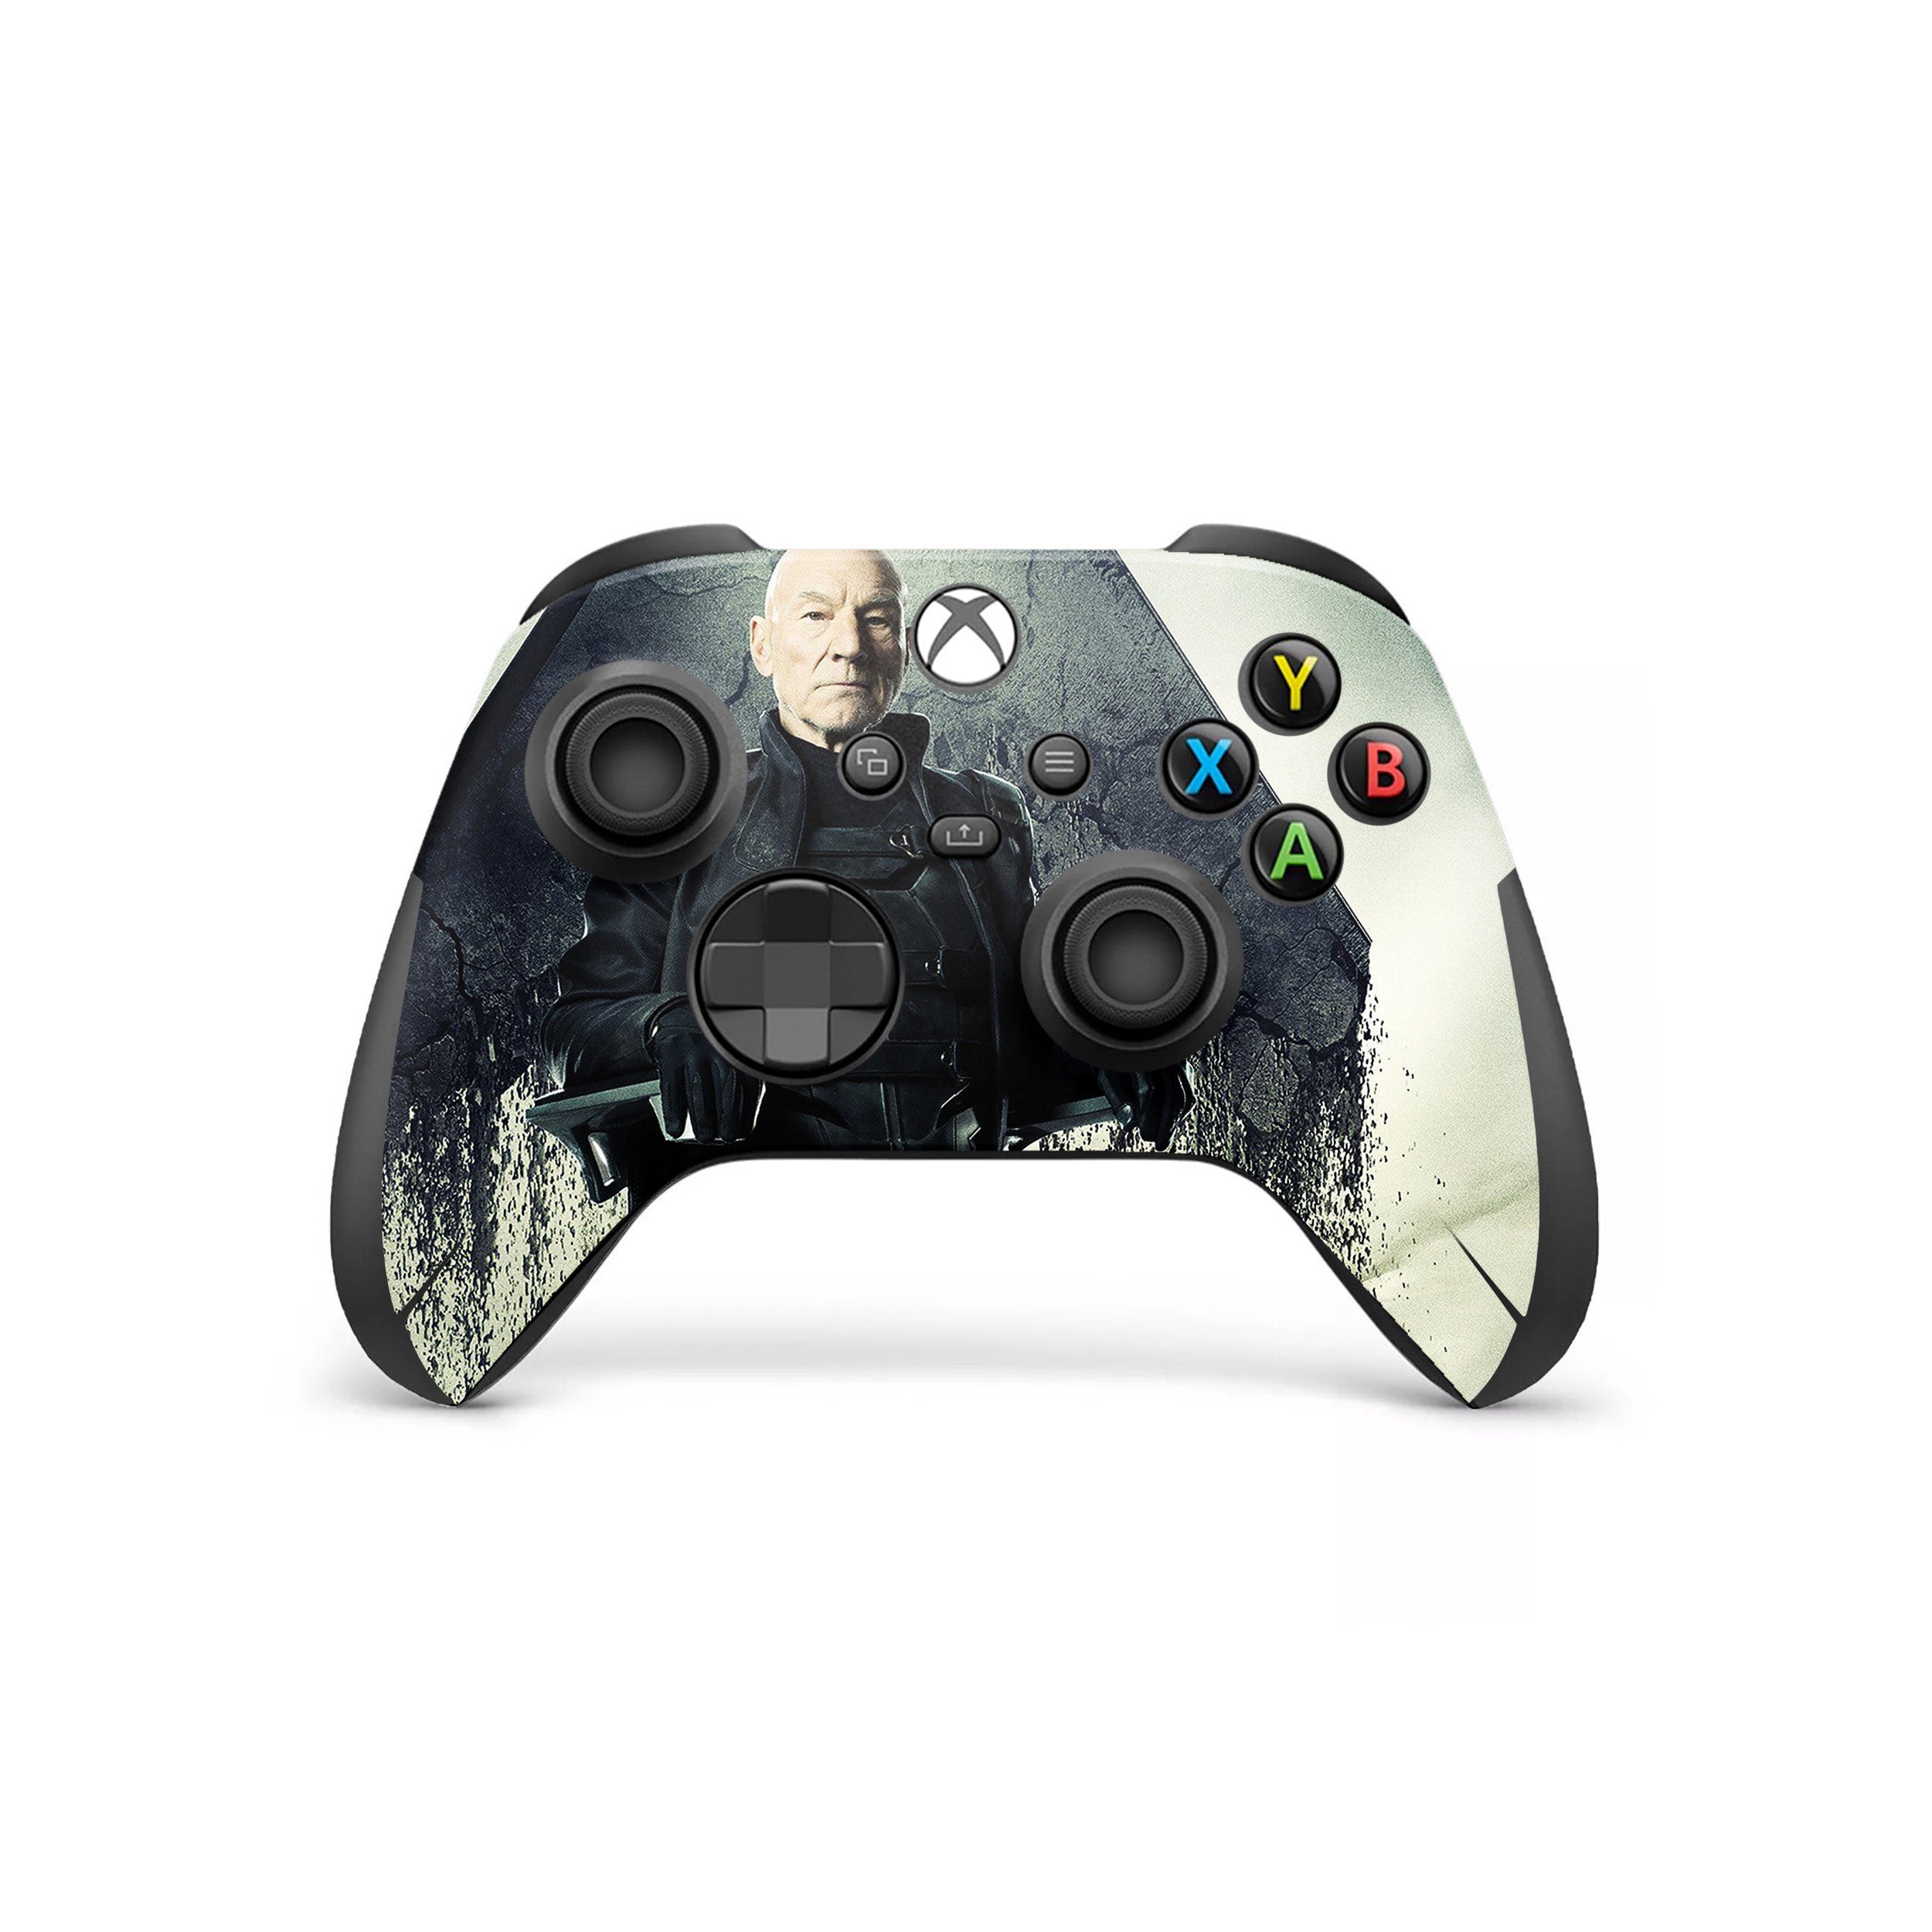 A video game skin featuring a Marvel X Men Professor X design for the Xbox Wireless Controller.